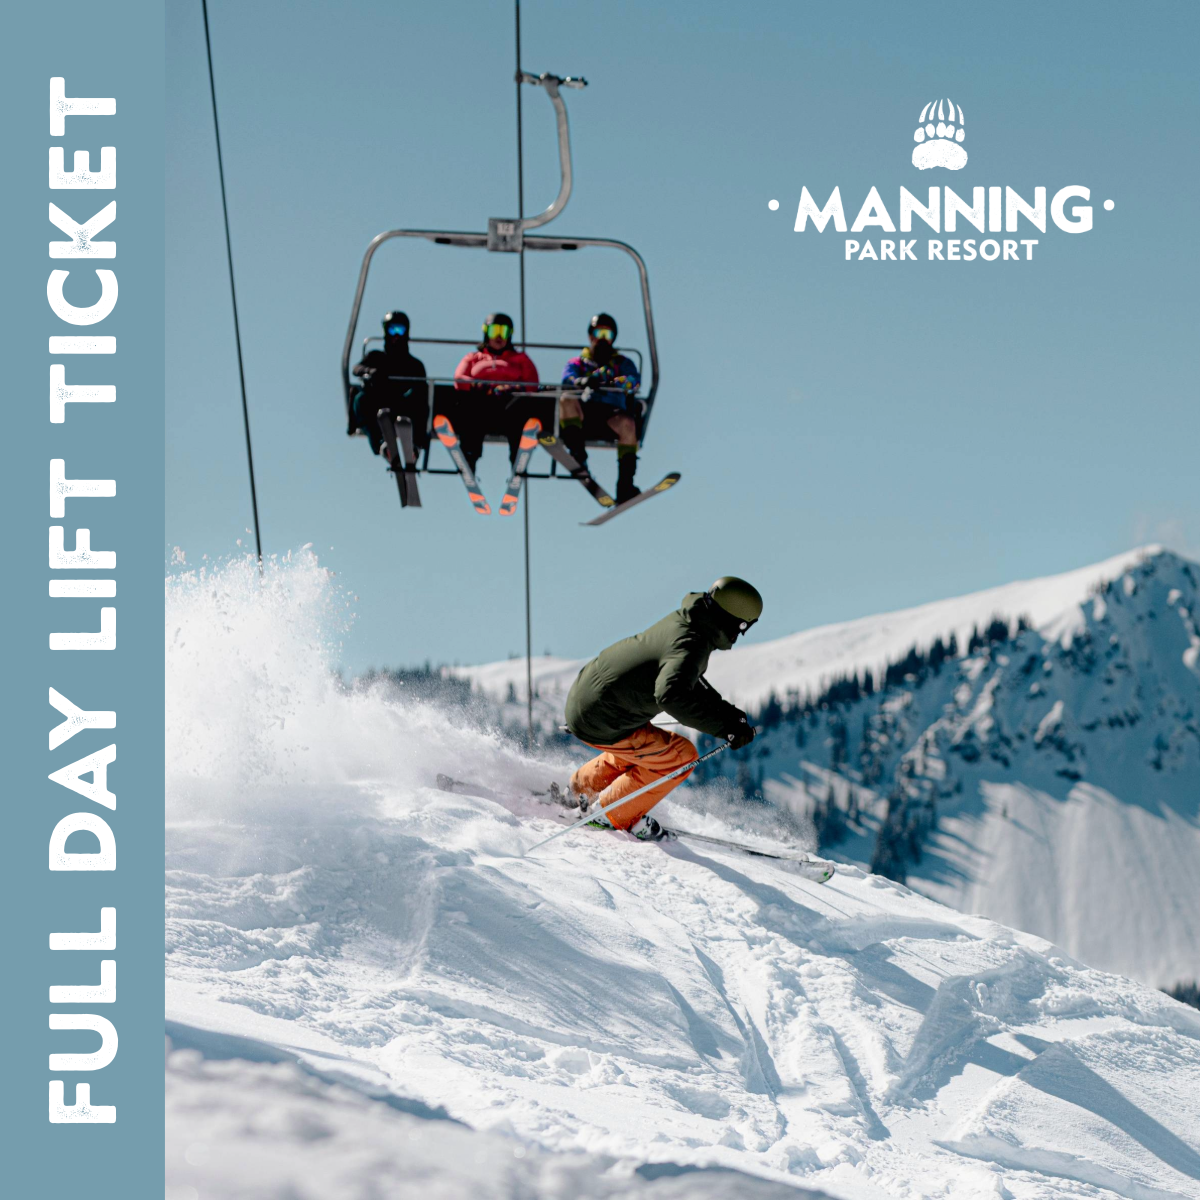 Full Day Lift Tickets